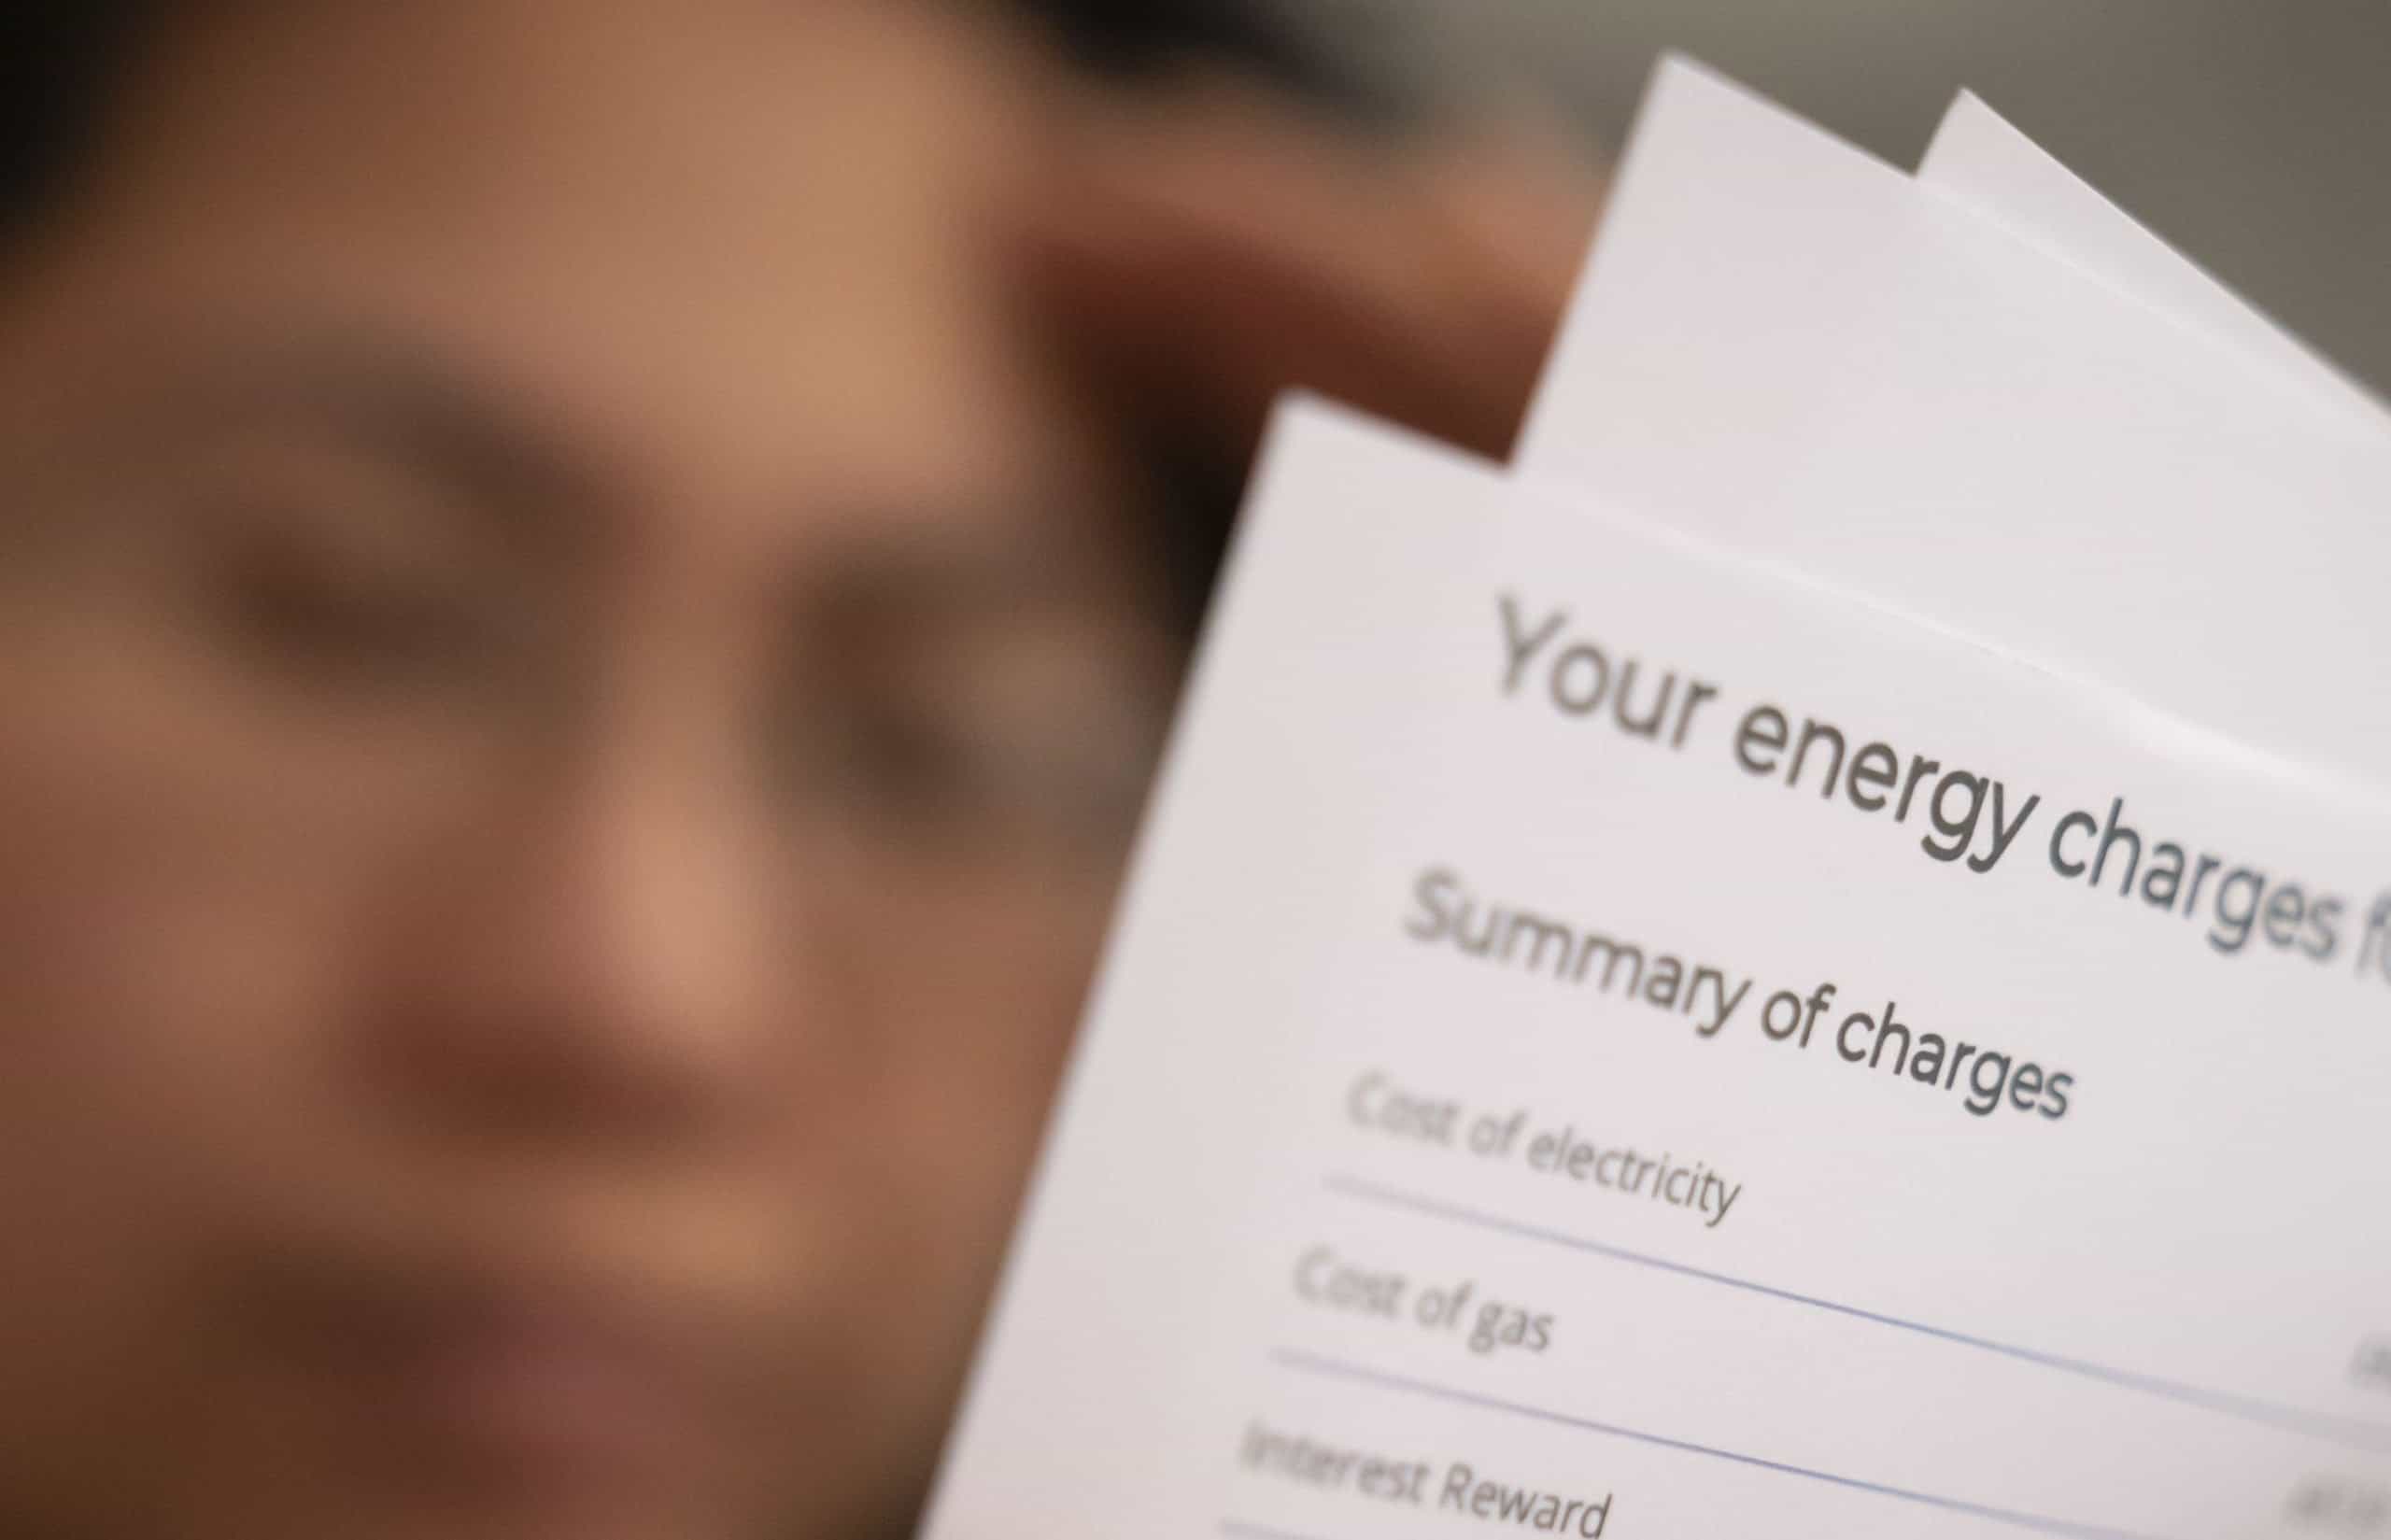 100,000 Brits have pledged to stop paying their energy bills